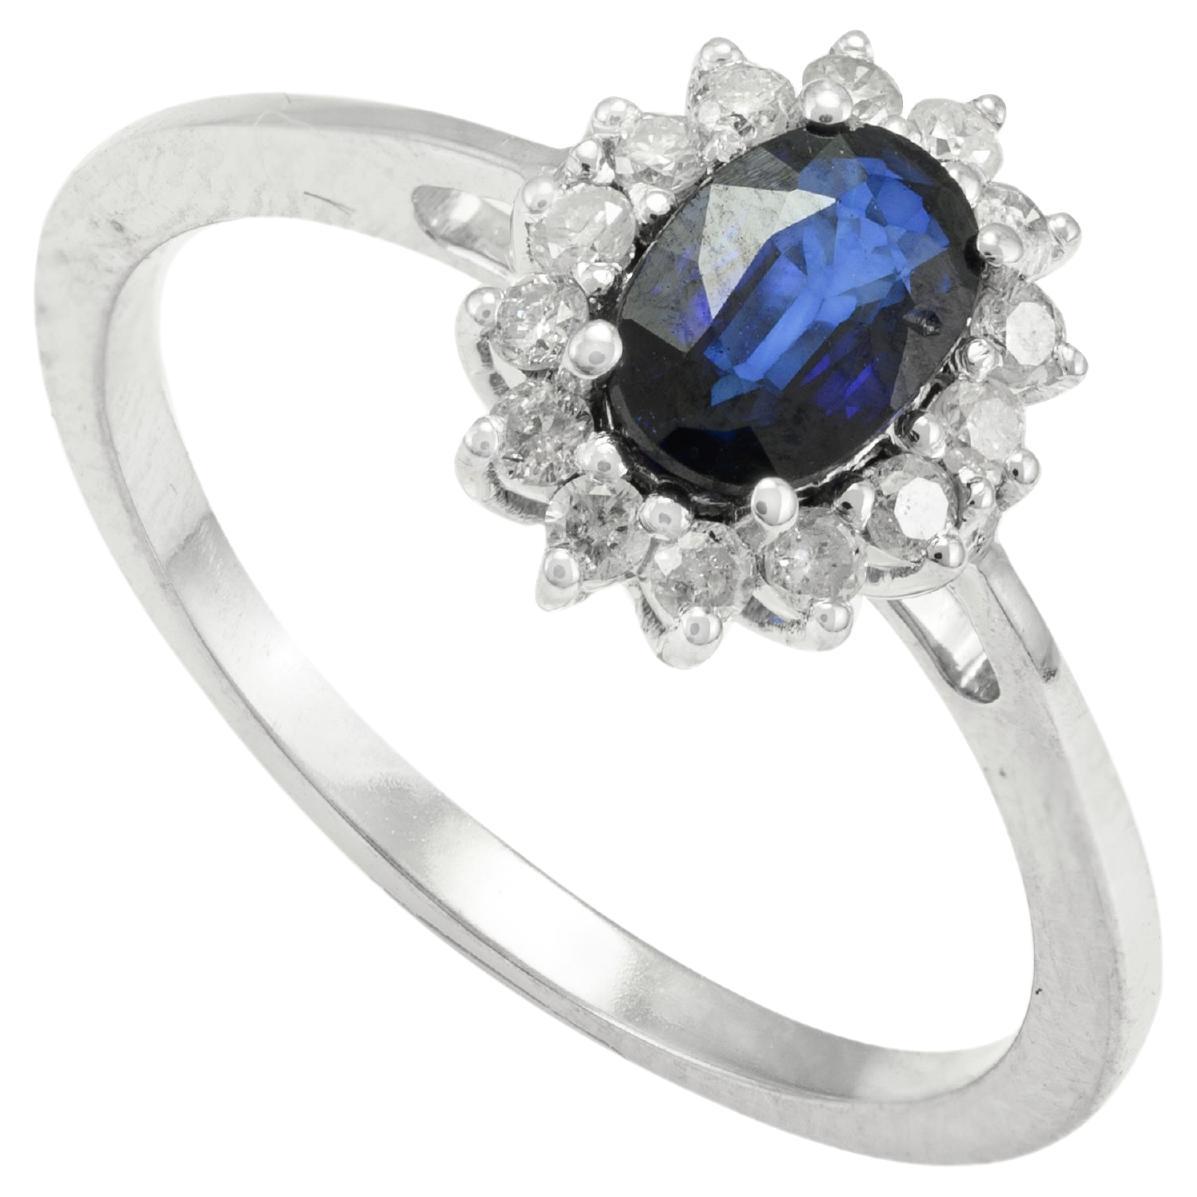 For Sale:  Classic0.43 Ct Blue Sapphire and Halo Diamond Ring in 14k Solid White Gold